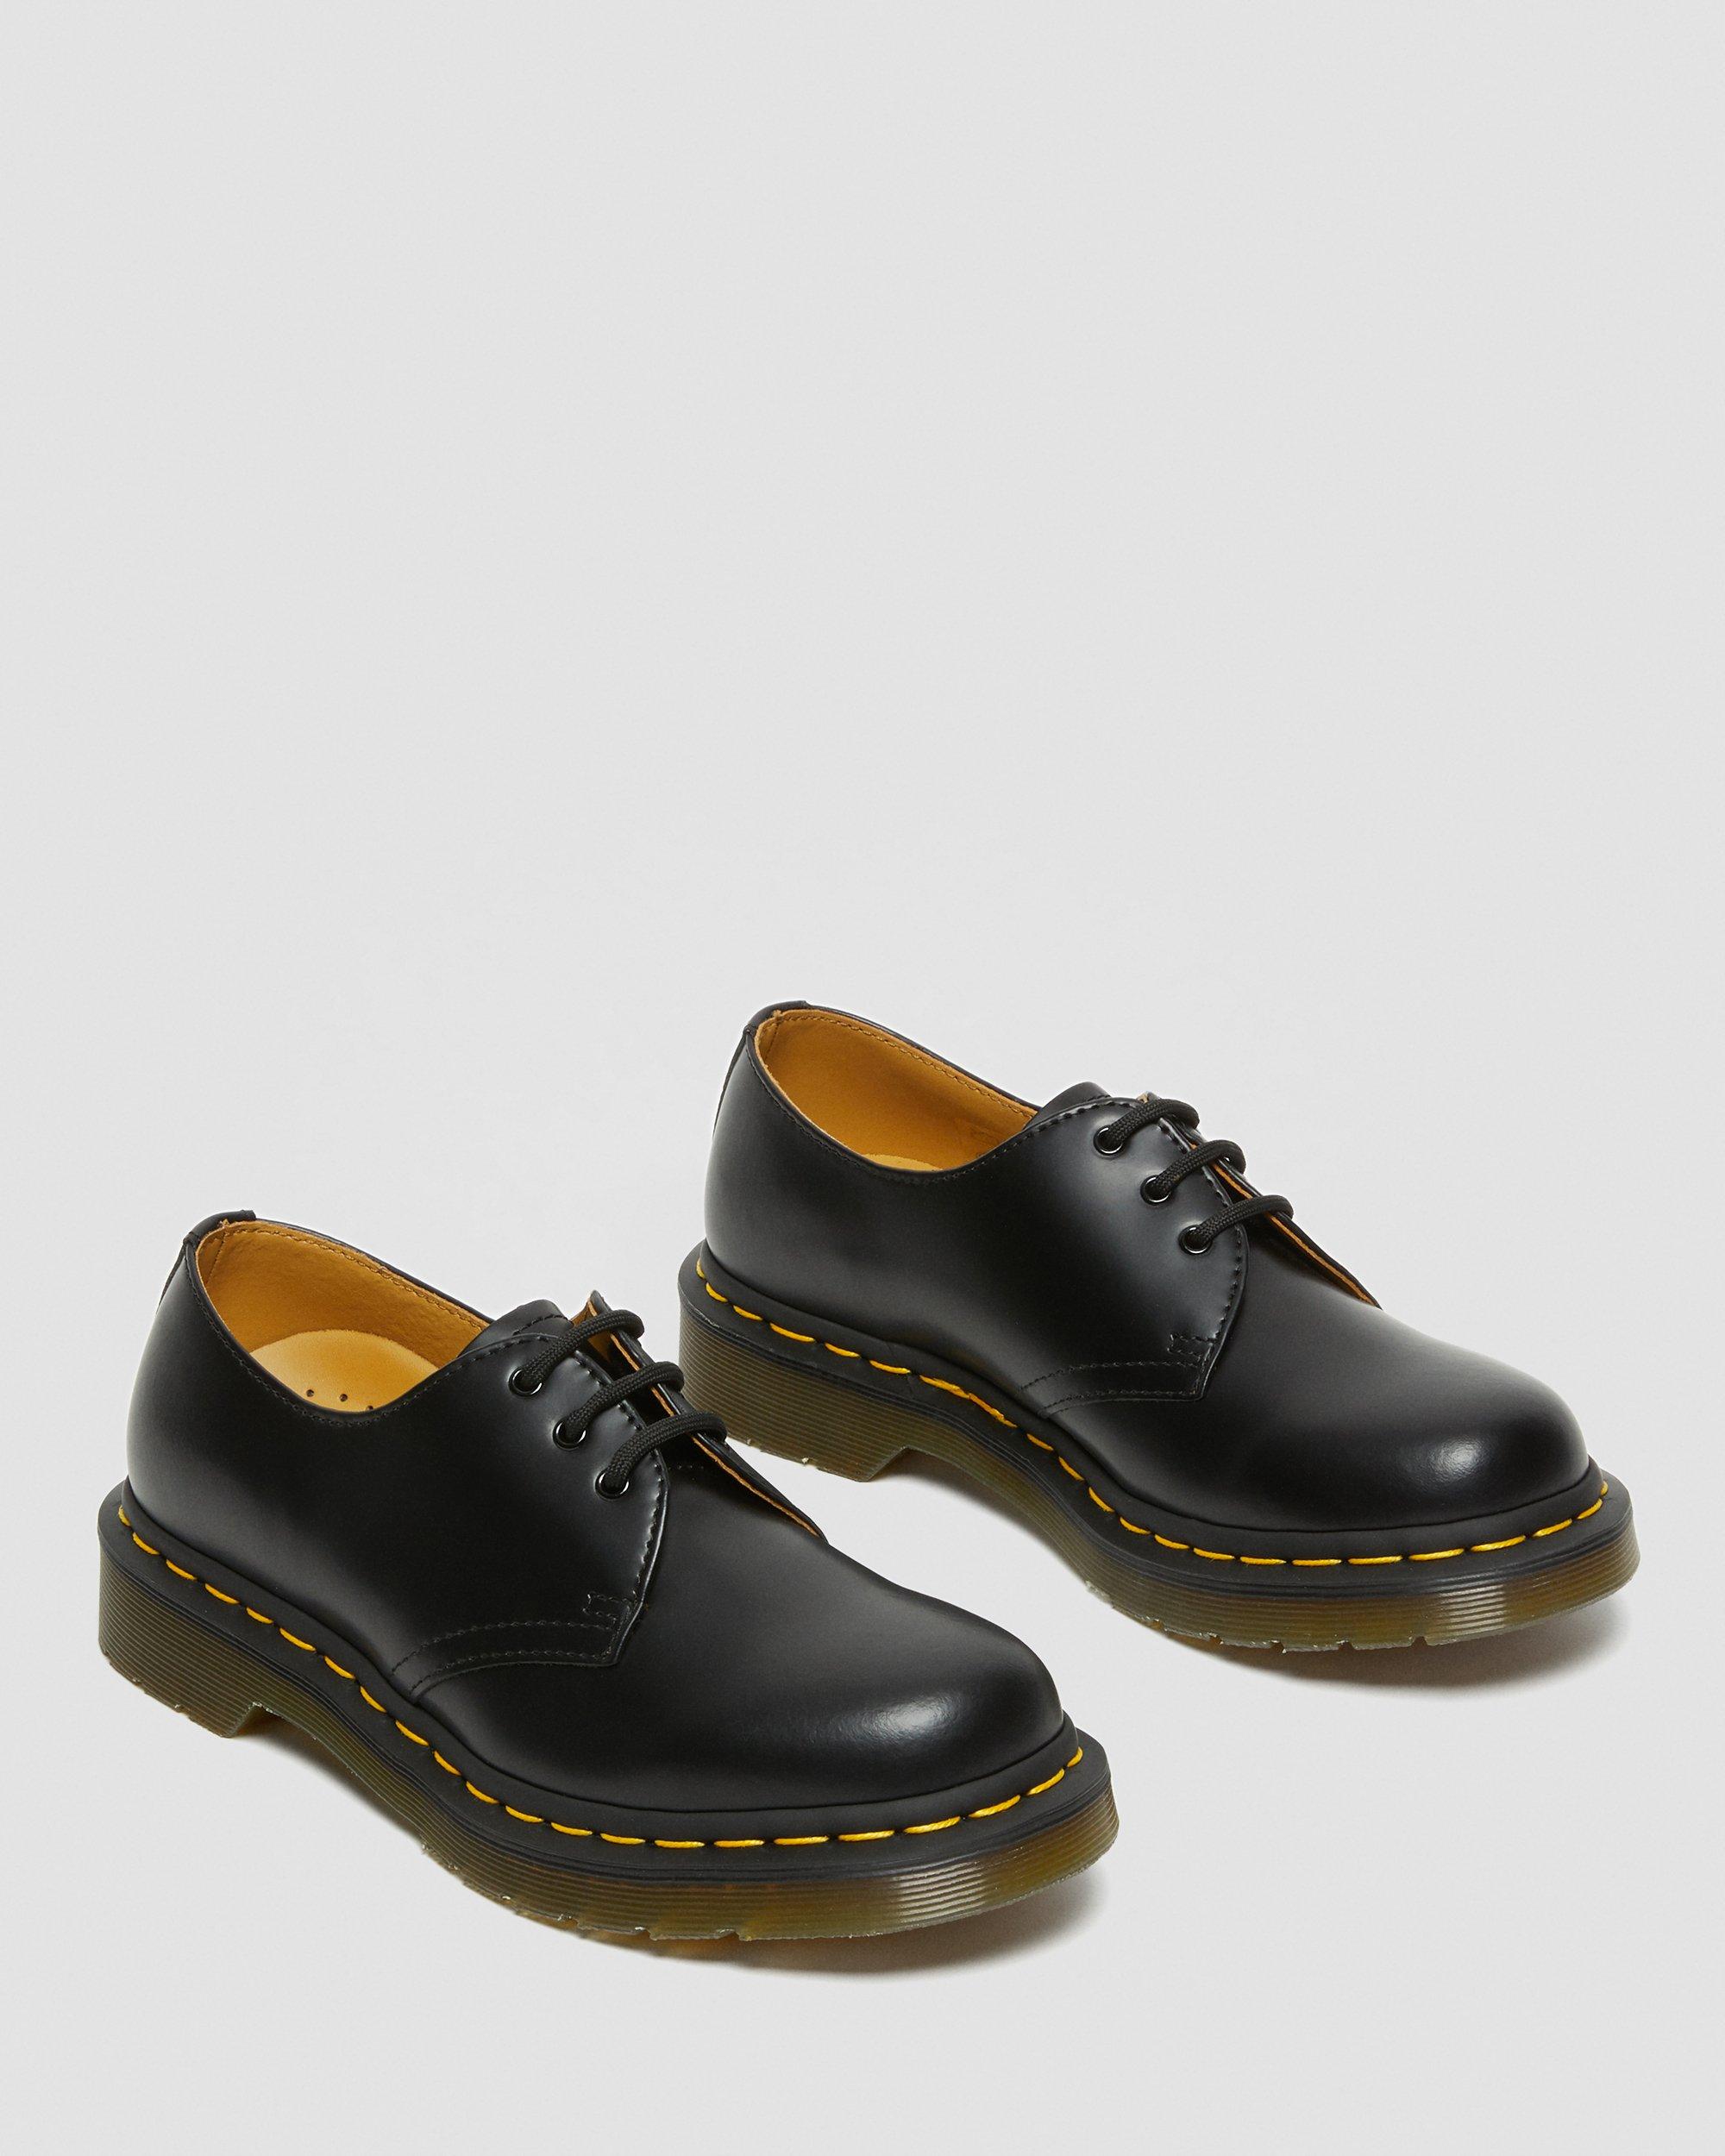 1461 women's smooth leather oxford shoes